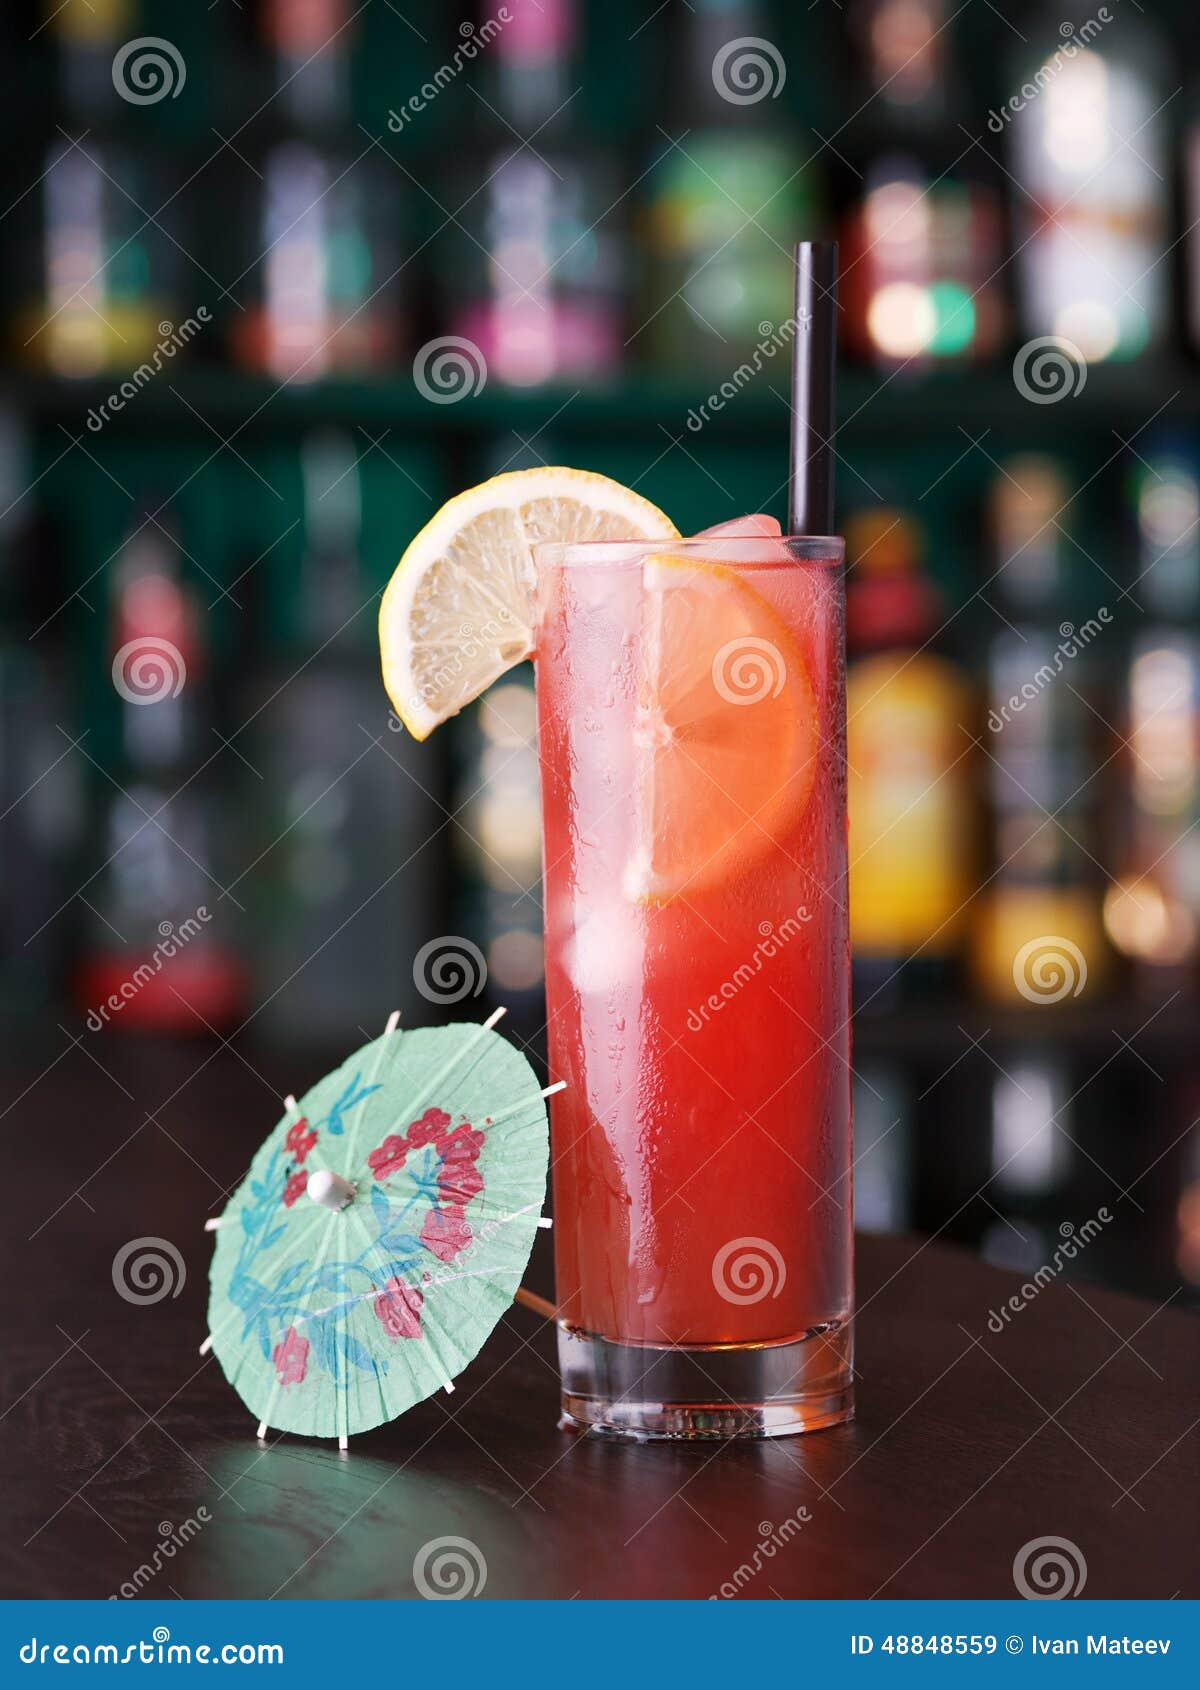 Cocktails Collection - Virgin Sex on the Beach Stock Image